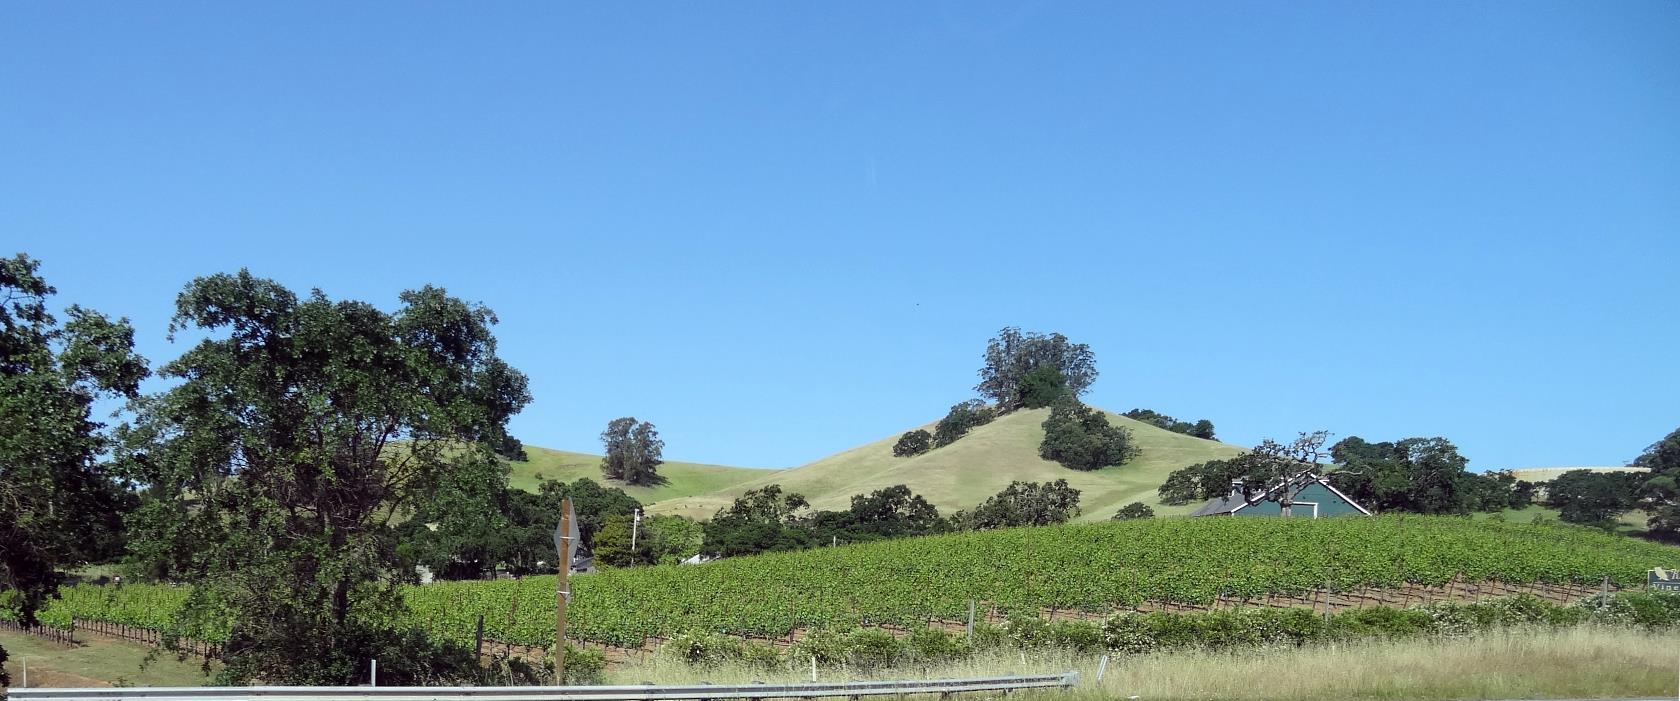 This is pretty typical of what you see along the hiway towards the coast, vineyards nestled up to the forested mountains.